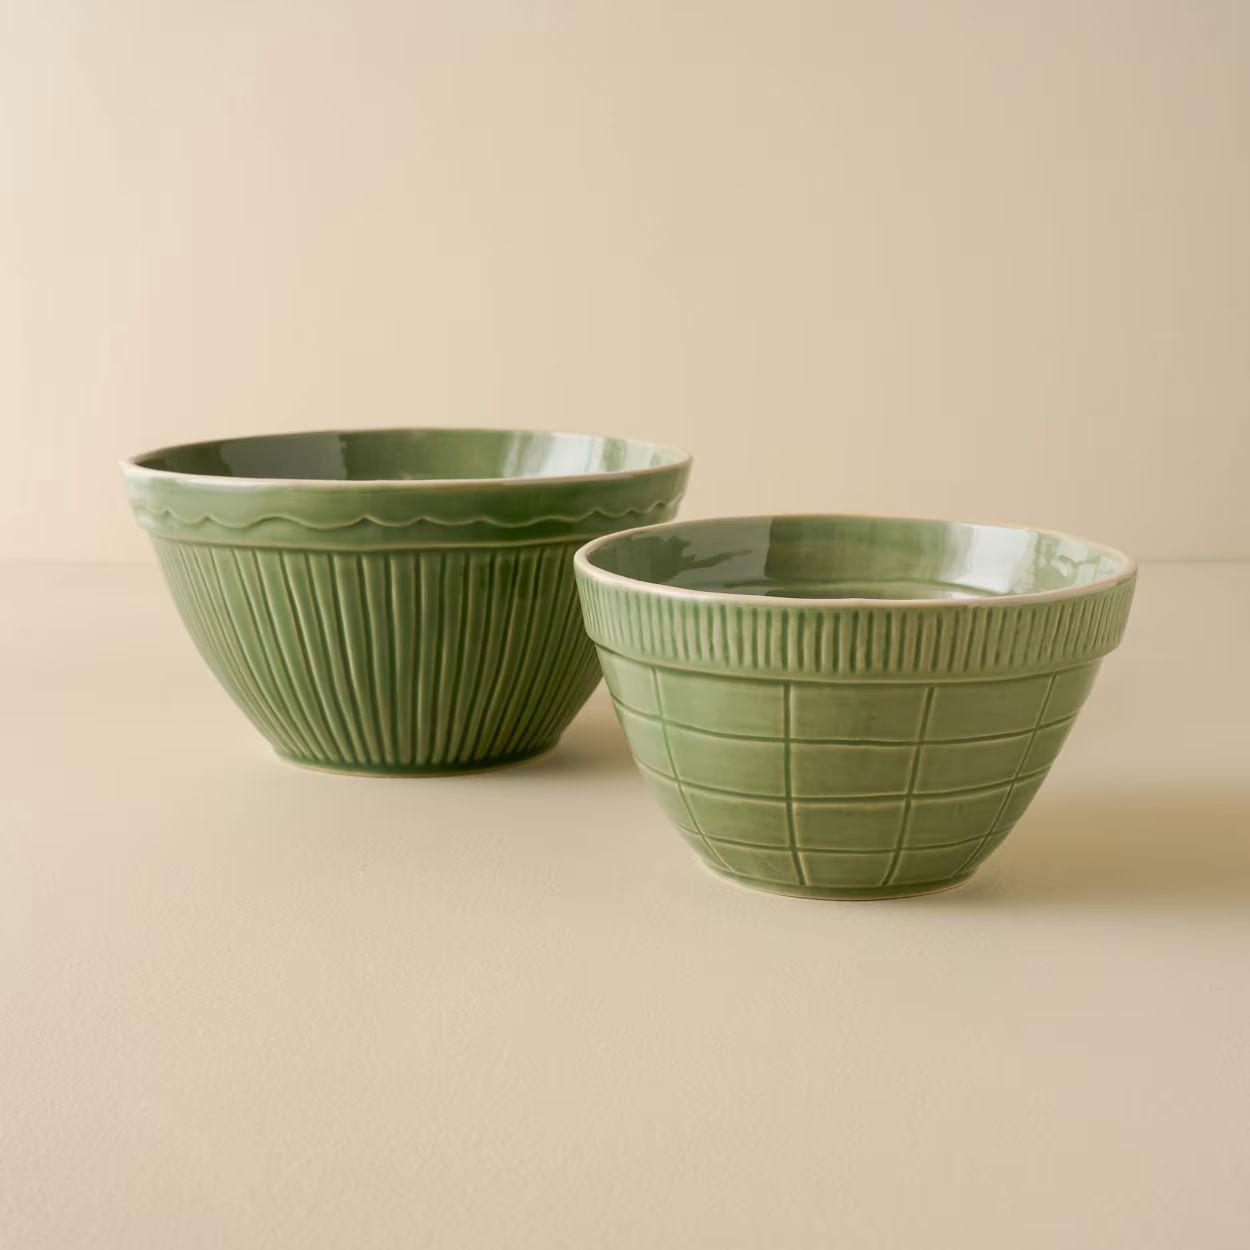 Vintage-Inspired Green Mixing Bowl Set of Two | Magnolia